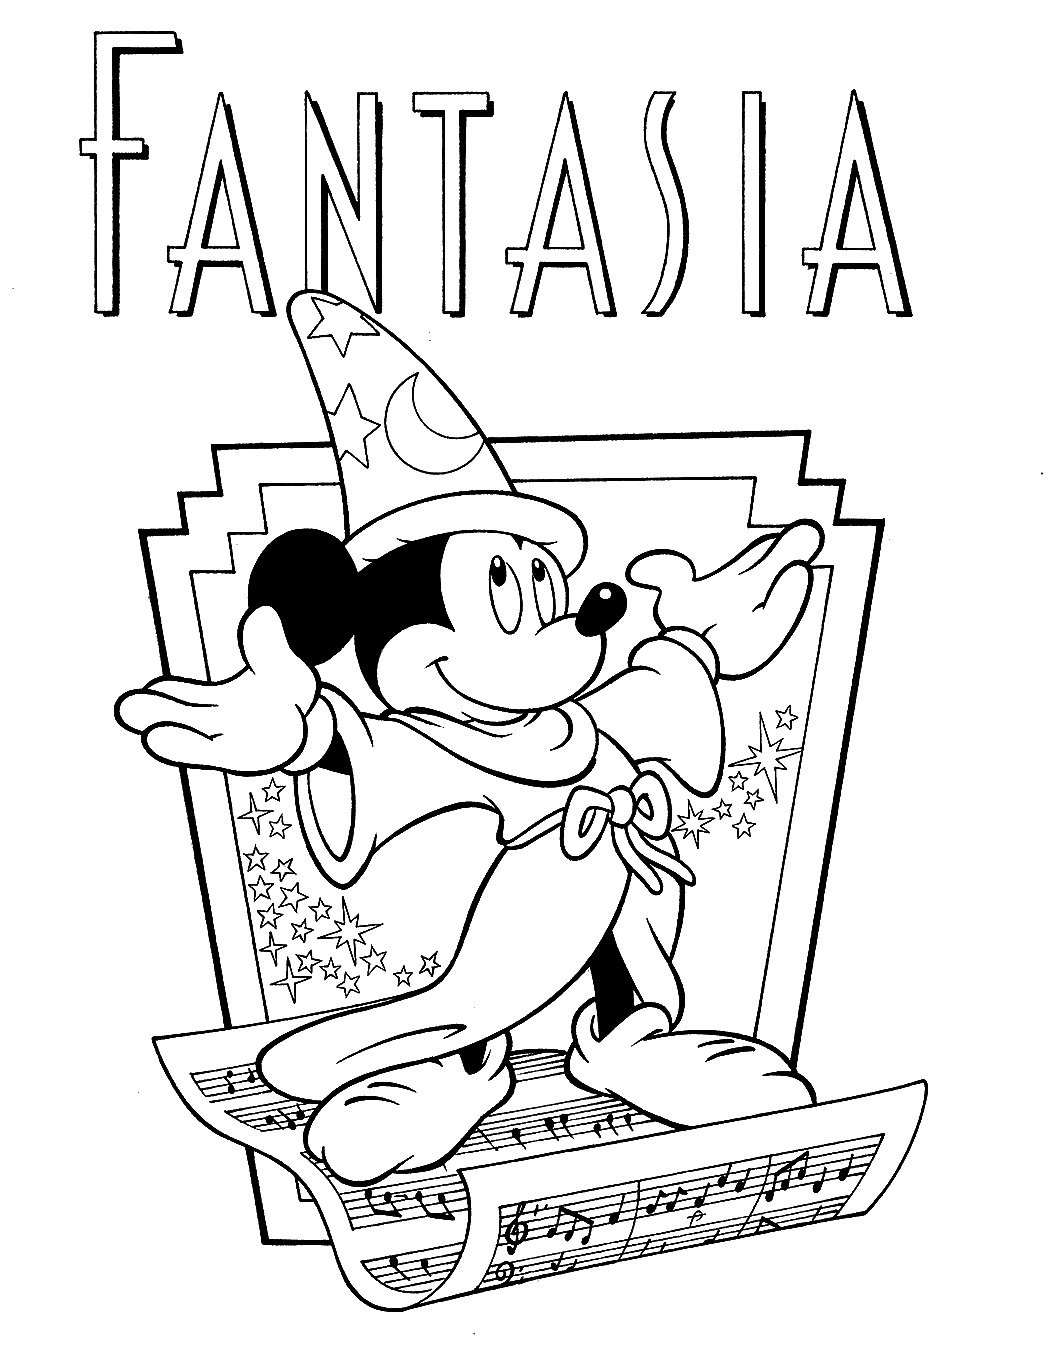 Fantasia Coloring Pages